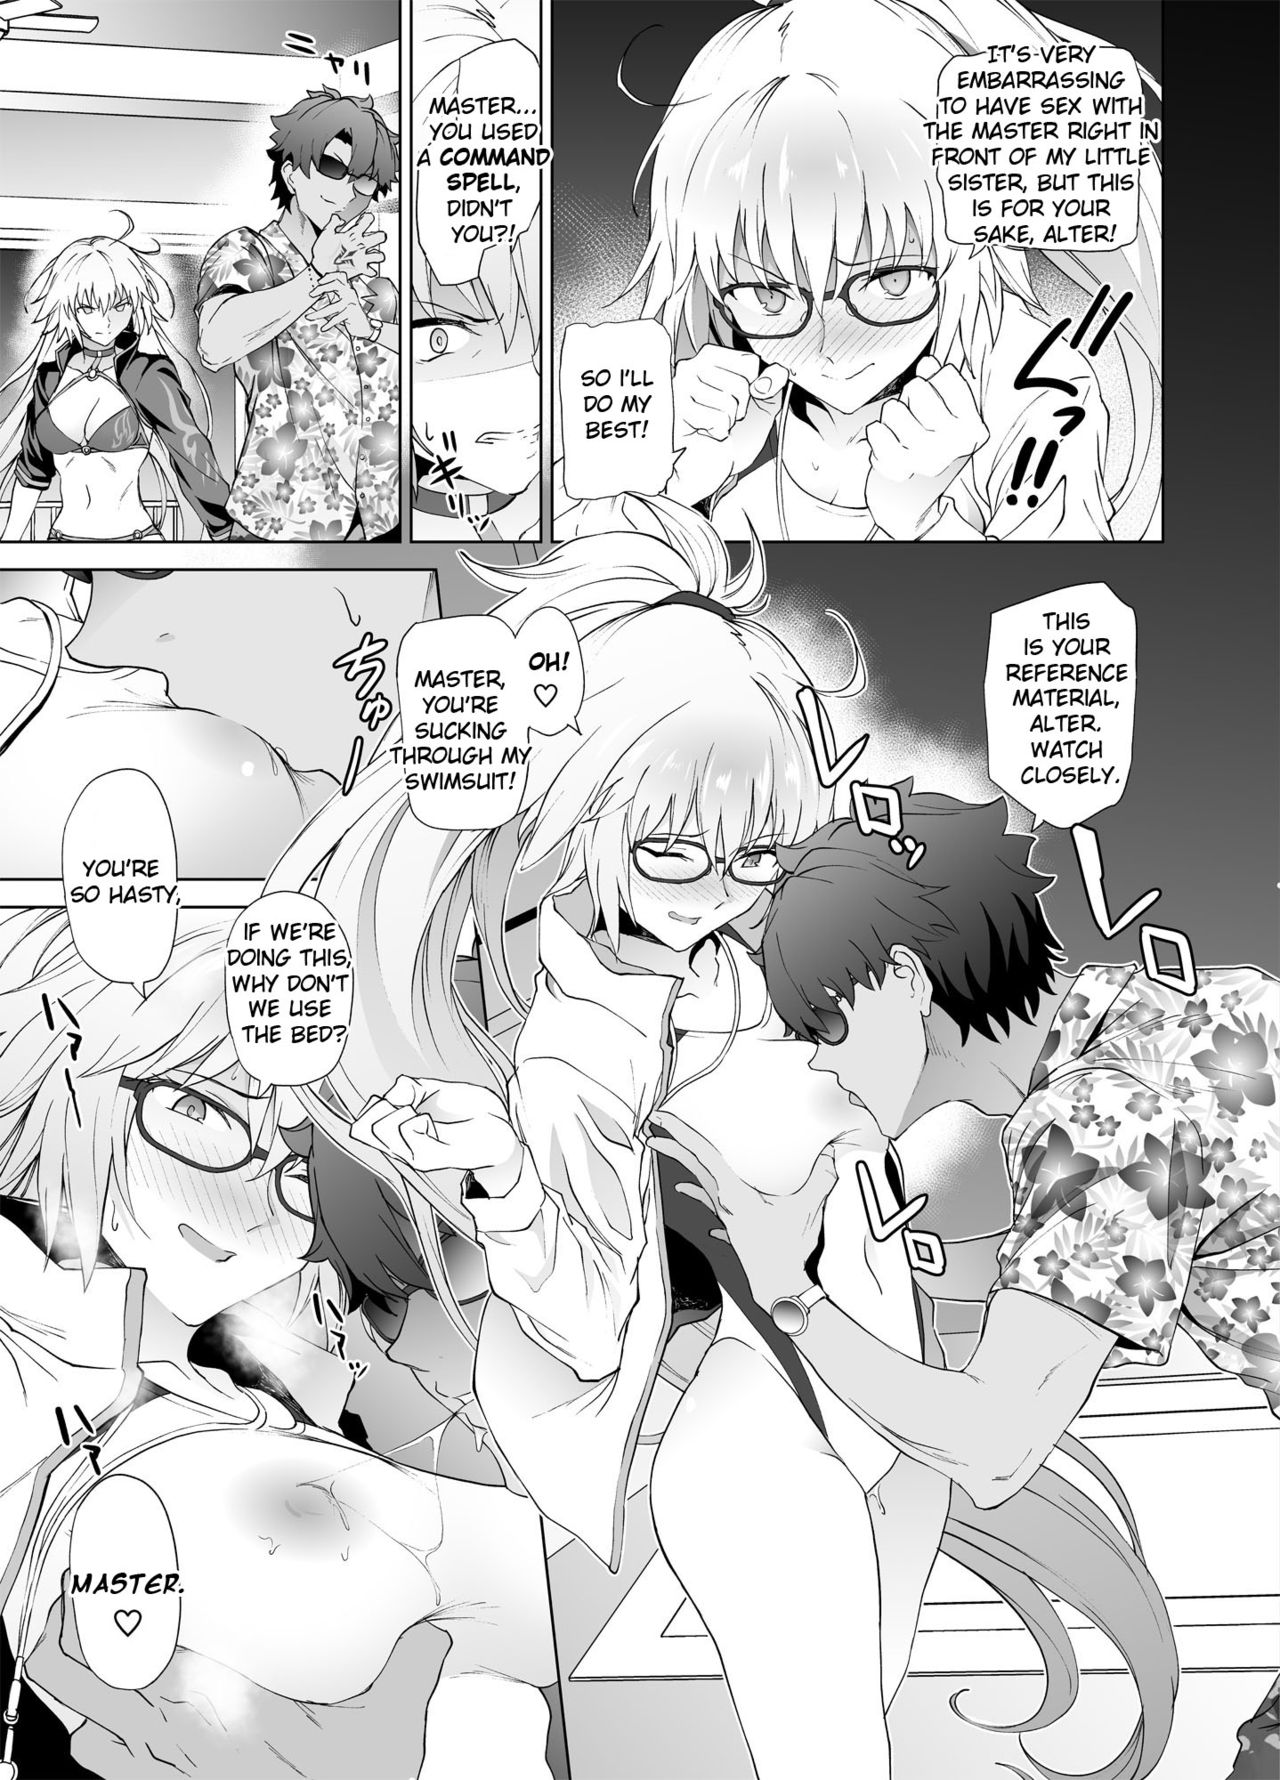 [EXTENDED PART (Endo Yoshiki)] Jeanne W (Fate/Grand Order) [Digital] (English) page 8 full